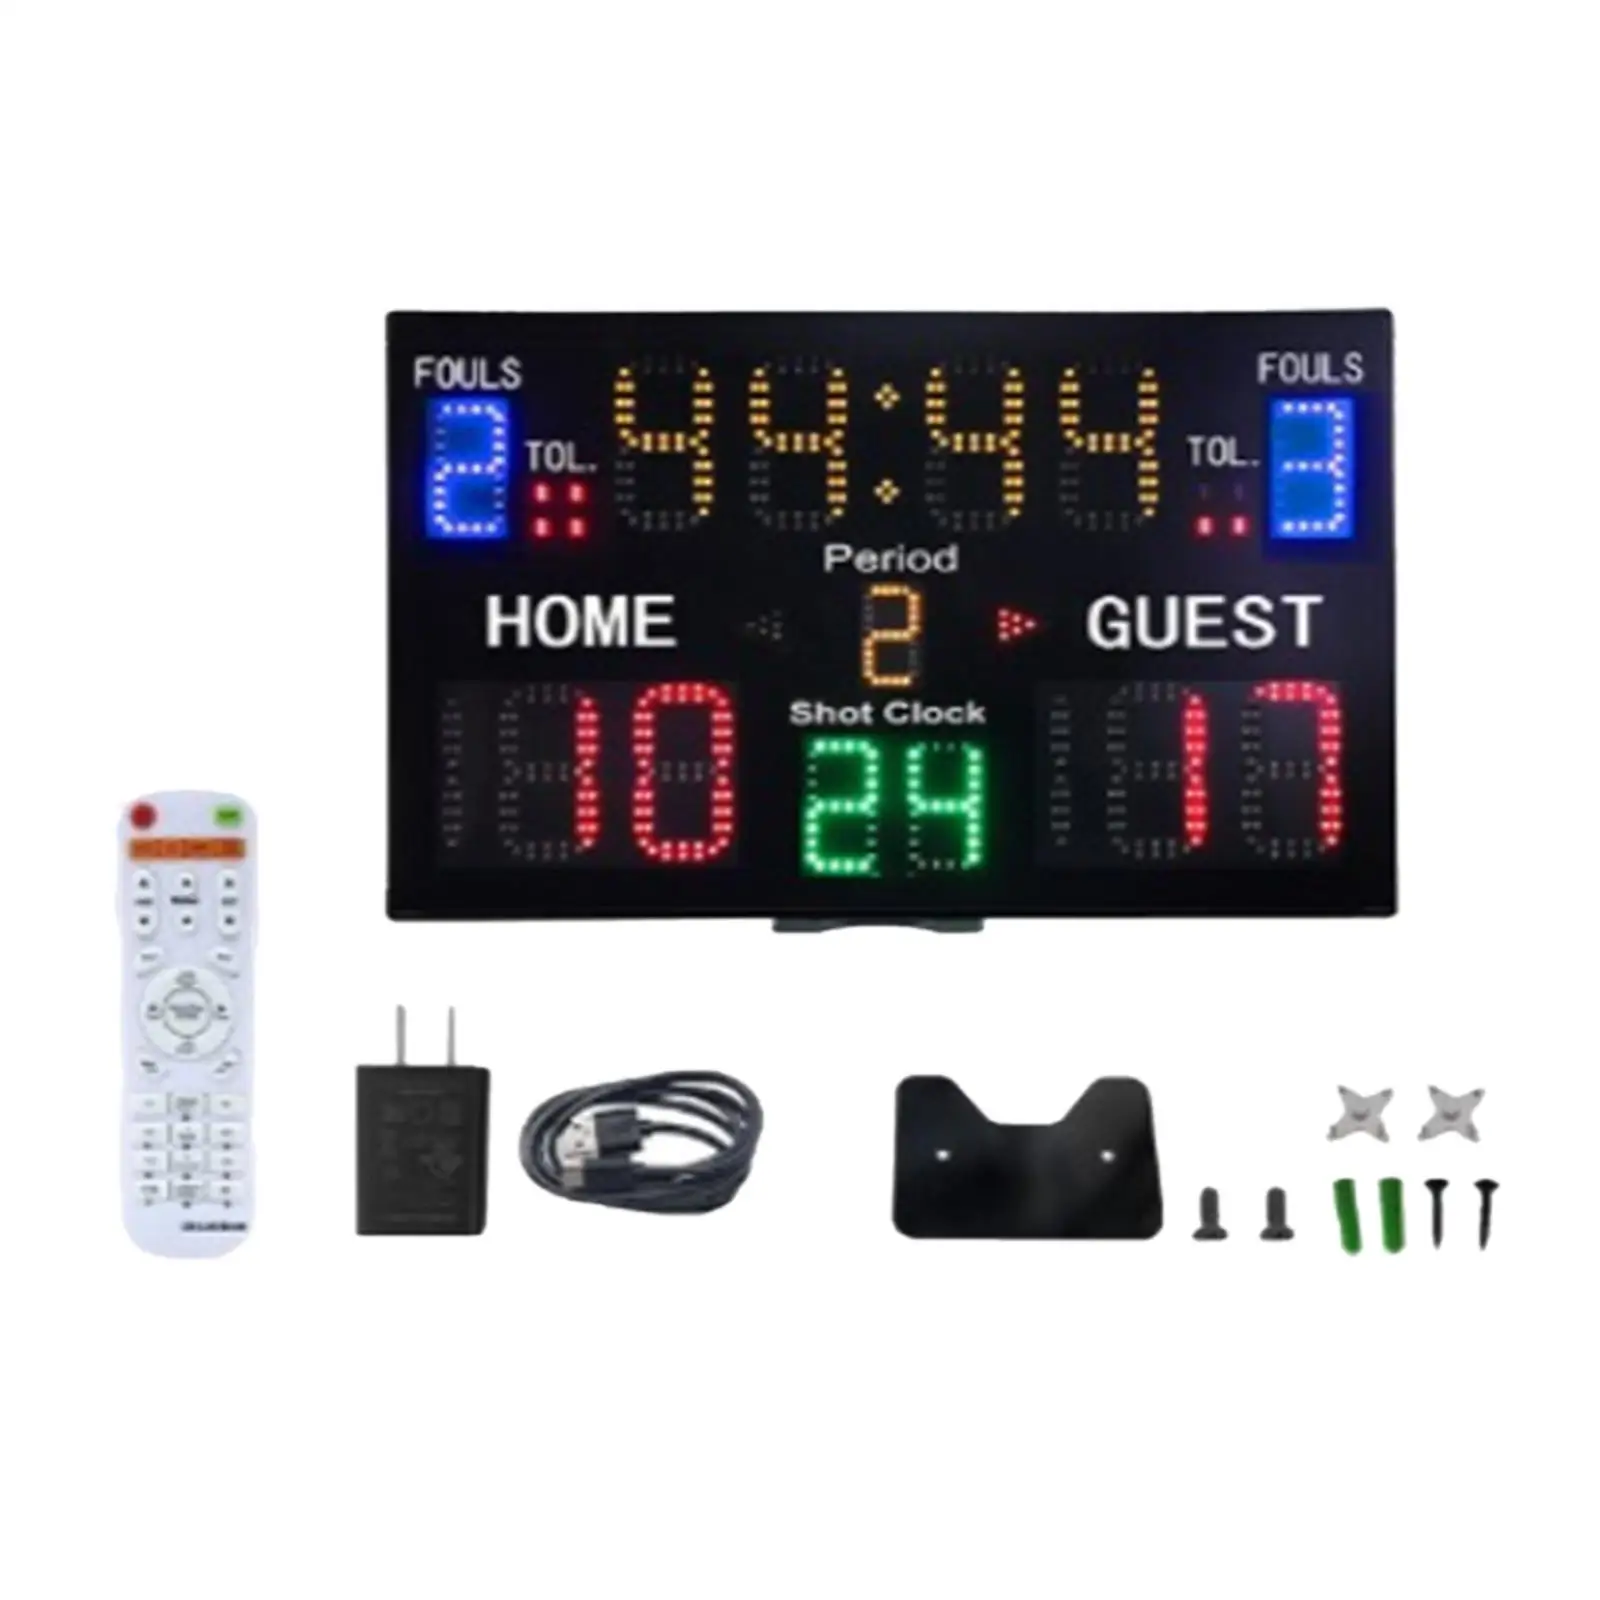 Portable Indoor Basketball Scoreboard with Remote Counting Electronic Digital Scoreboard Score Clock Score Keeper for Games Judo